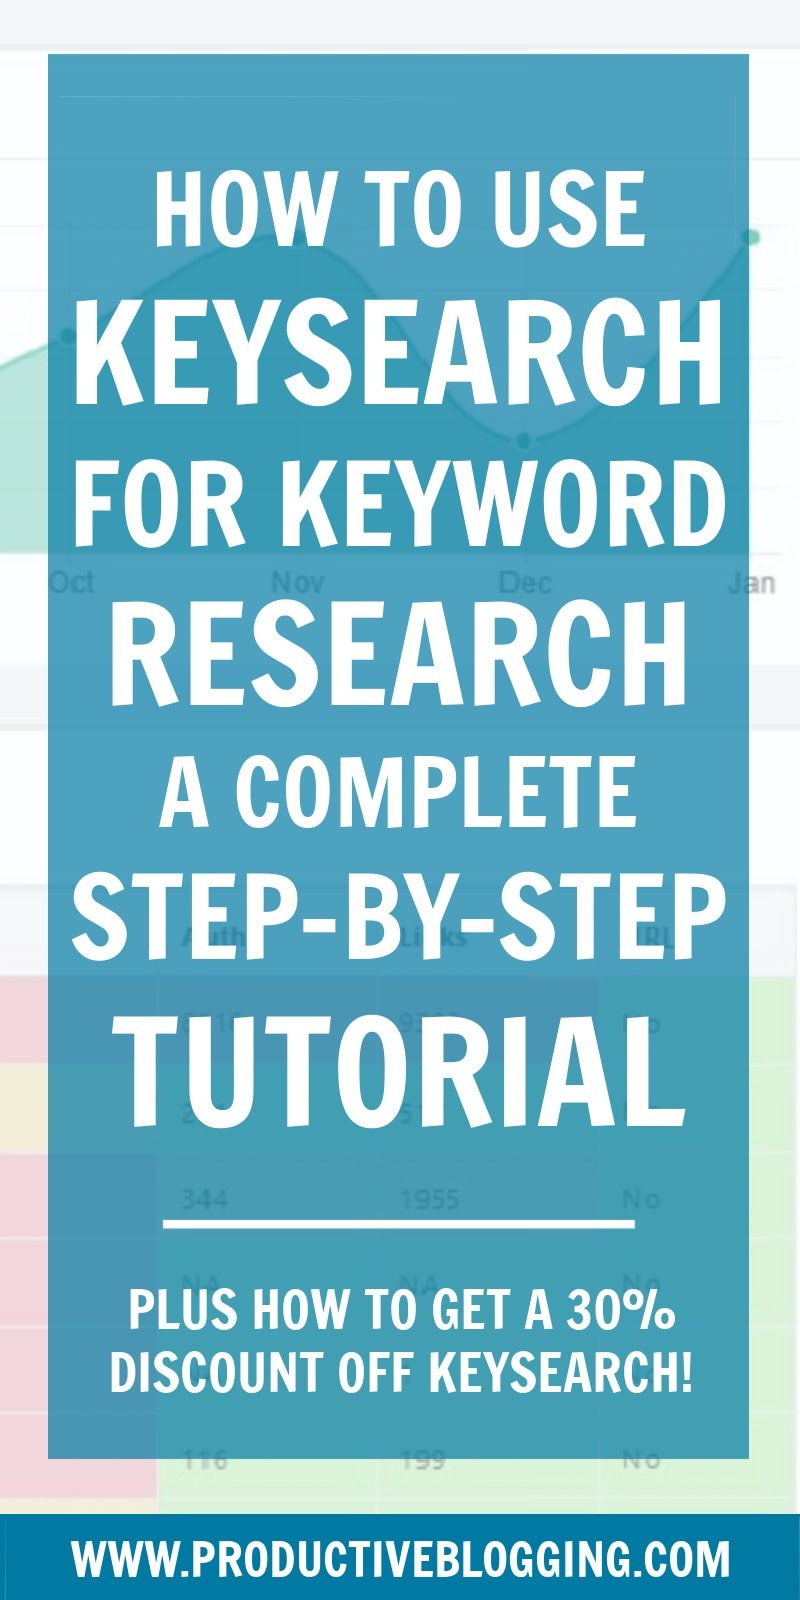 KeySearch is one of the most popular keyword research tools for bloggers and online business owners. But how do you actually use it? In this step-by-step tutorial, I’ll show you exactly how to use KeySearch to find keywords that will grow your blog traffic… and income! #keysearch #keysearchreview #keywordresearch #SEO #SEOtips #SEOhacks #googleSEO #searchengineoptimization #SEOforbloggers #blogSEO #growyourblog #bloggrowth #bloggingtips #blogtips #blogging #bloggers #productiveblogging